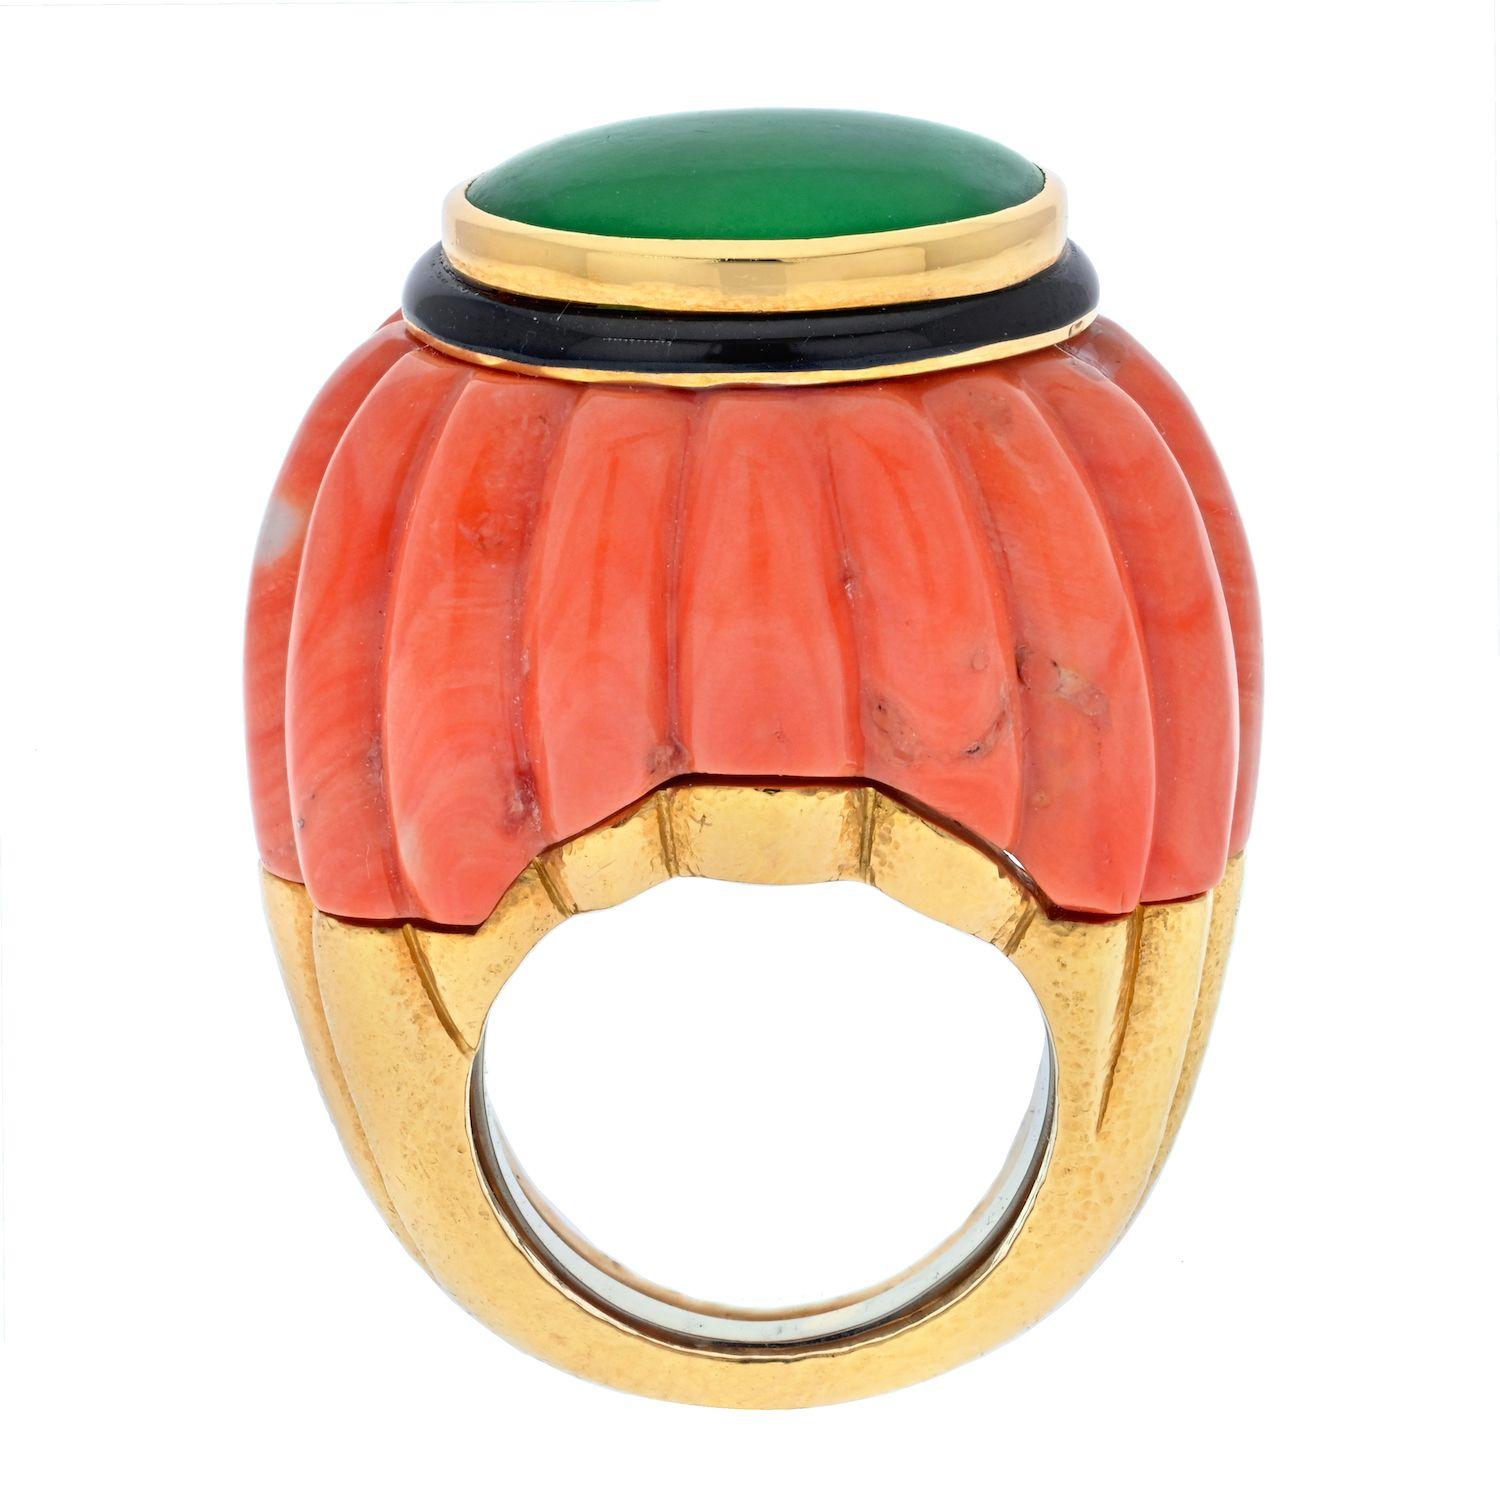 18K yellow gold jade and coral ring by David Webb. Features an oval polished piece of jade in the center. Black enamel highlights the coral and jade. The base of the ring is a single piece of carved coral. Ring is currently a size 6 with a butterfly